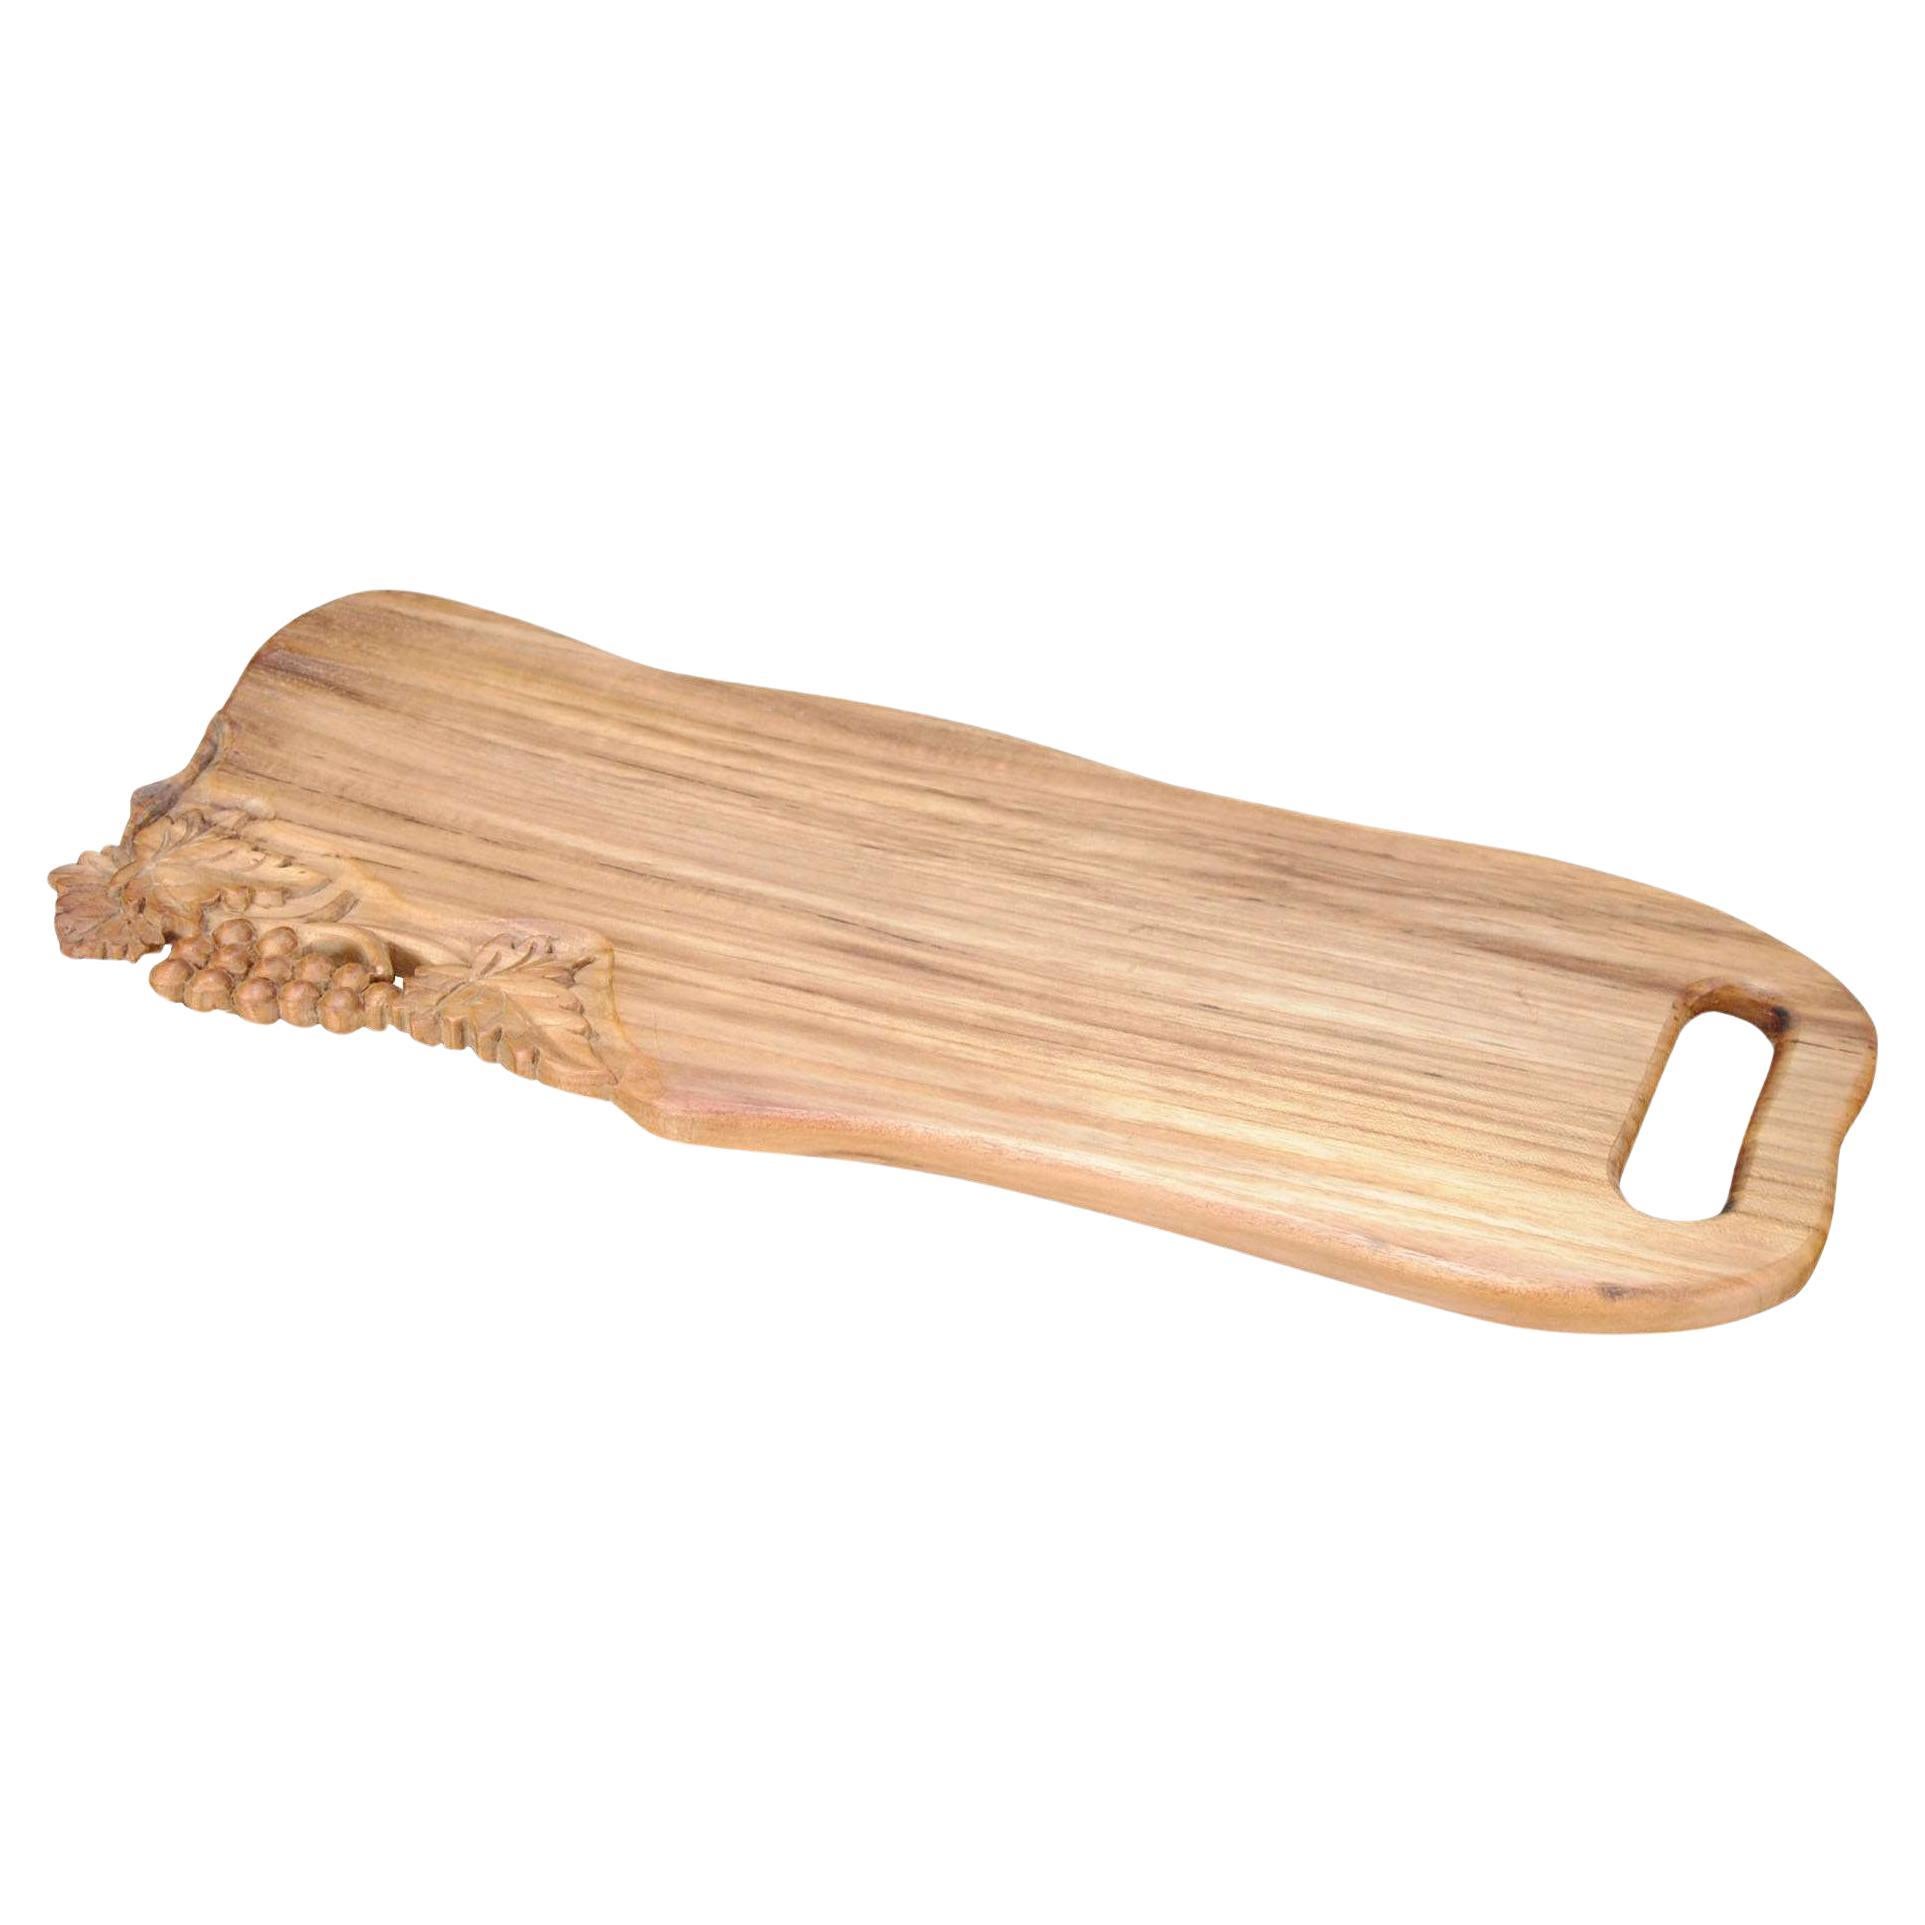 Wave Shaped Teak Cutting Board with Grapes For Sale